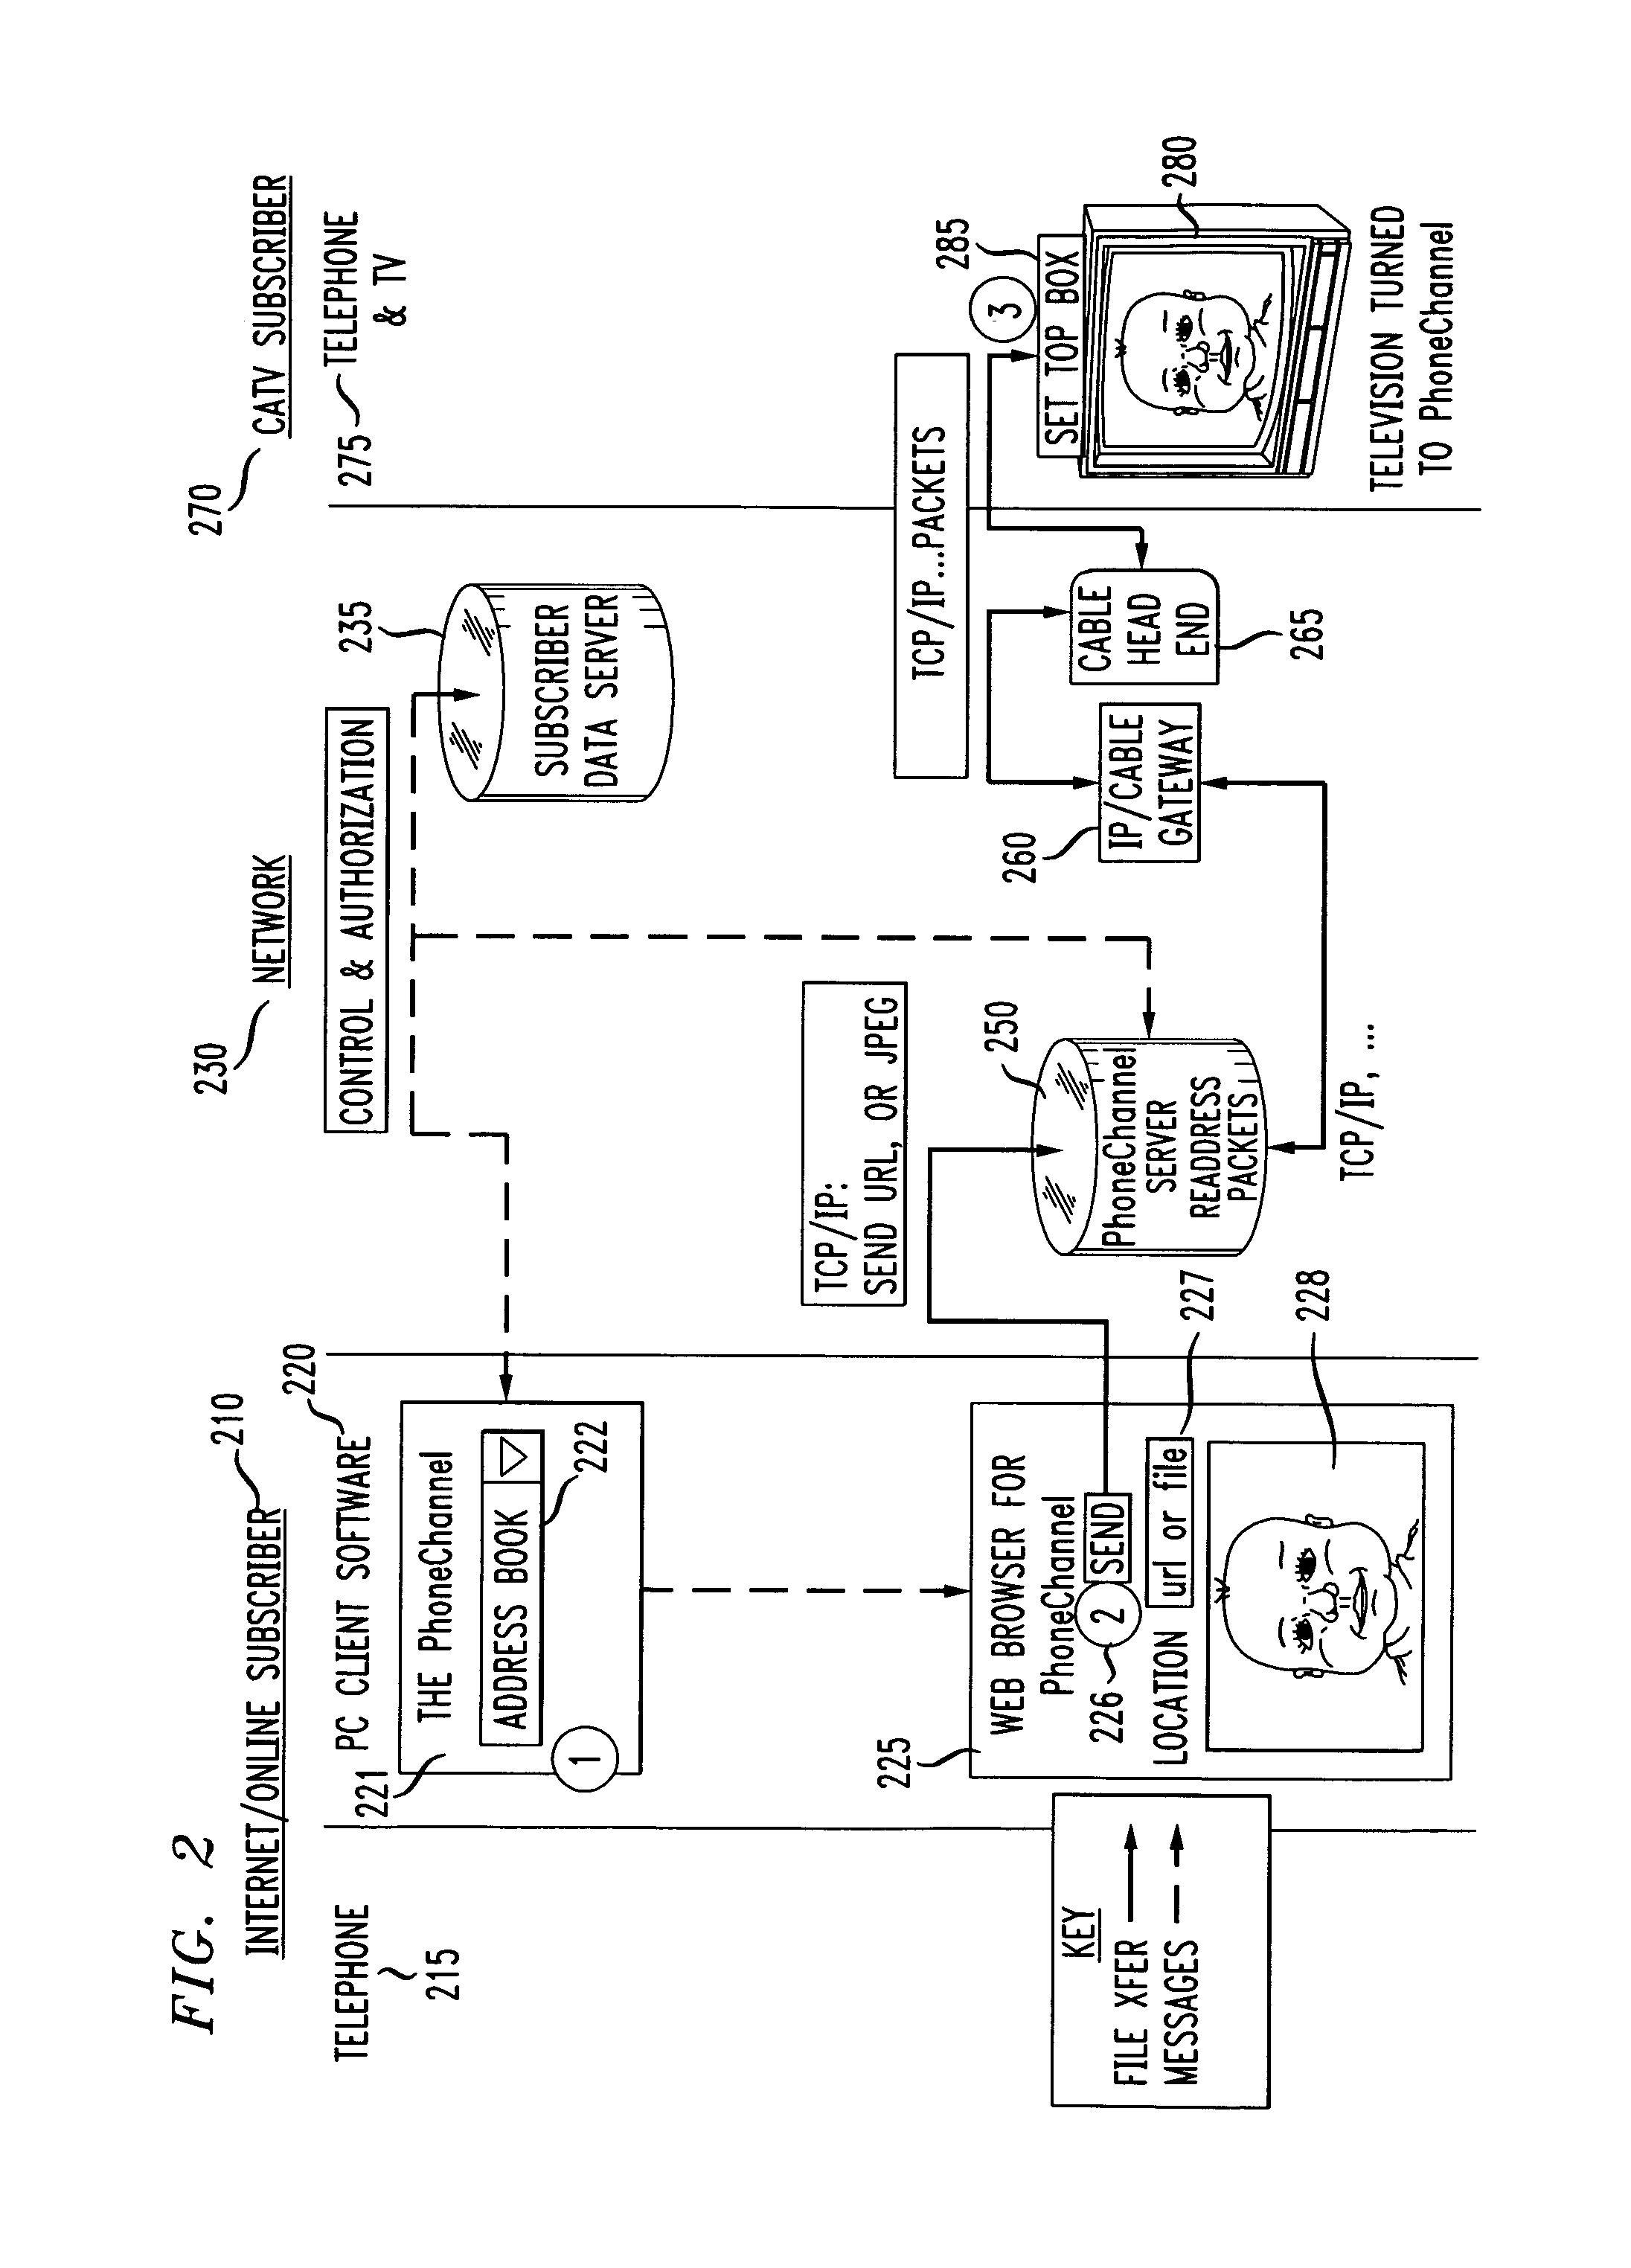 System and method for sharing information between a concierge and guest